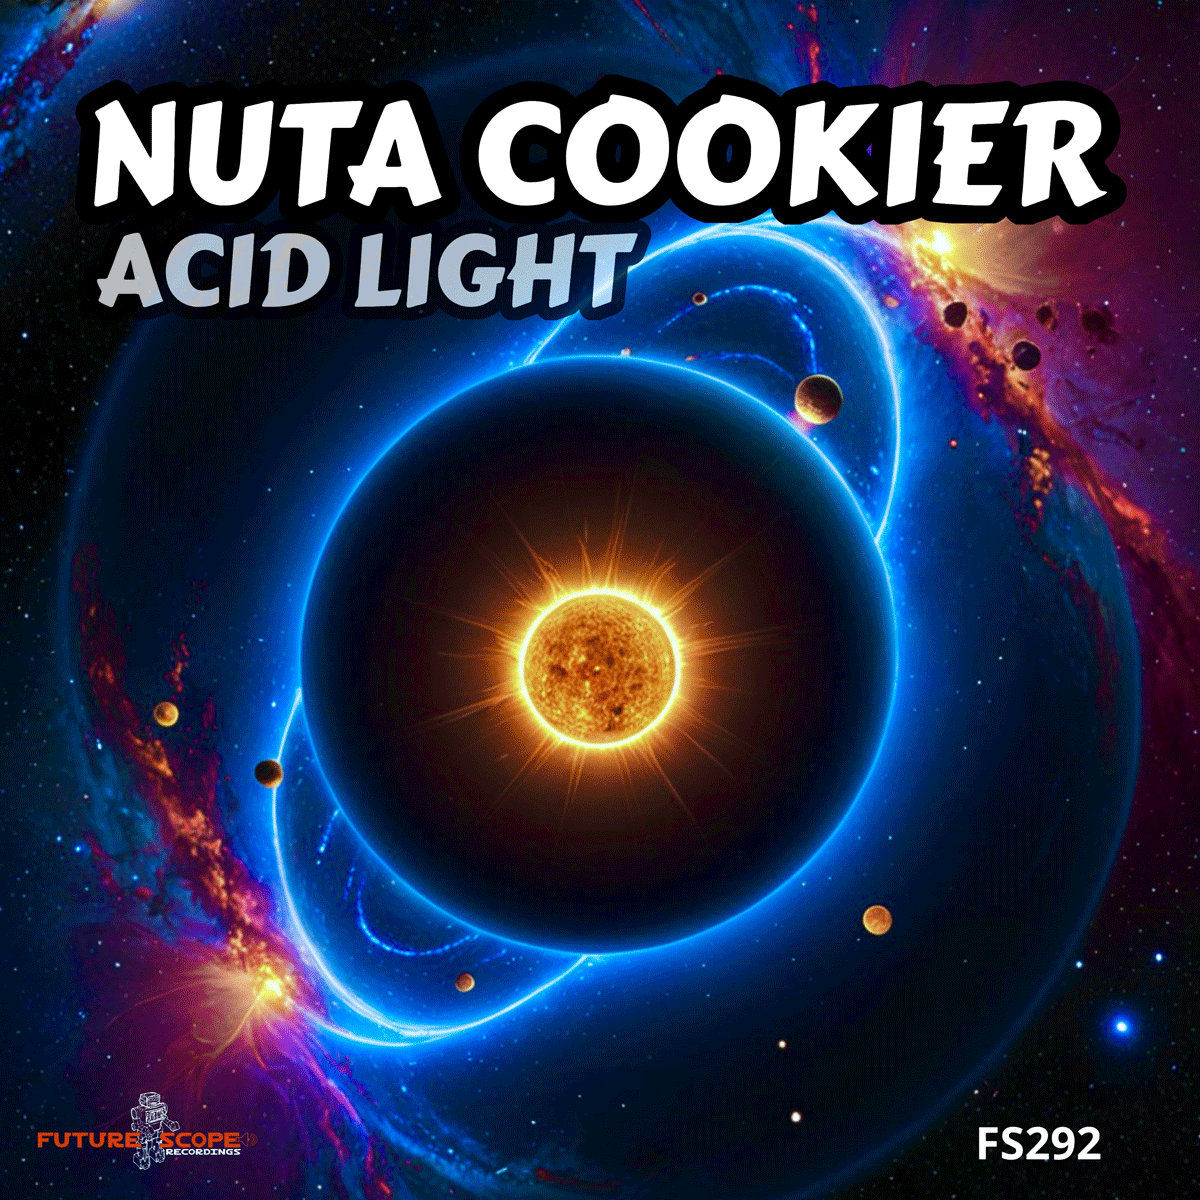 Nuta Cookier is back, and “Acid Light” propels you to explore new frontiers